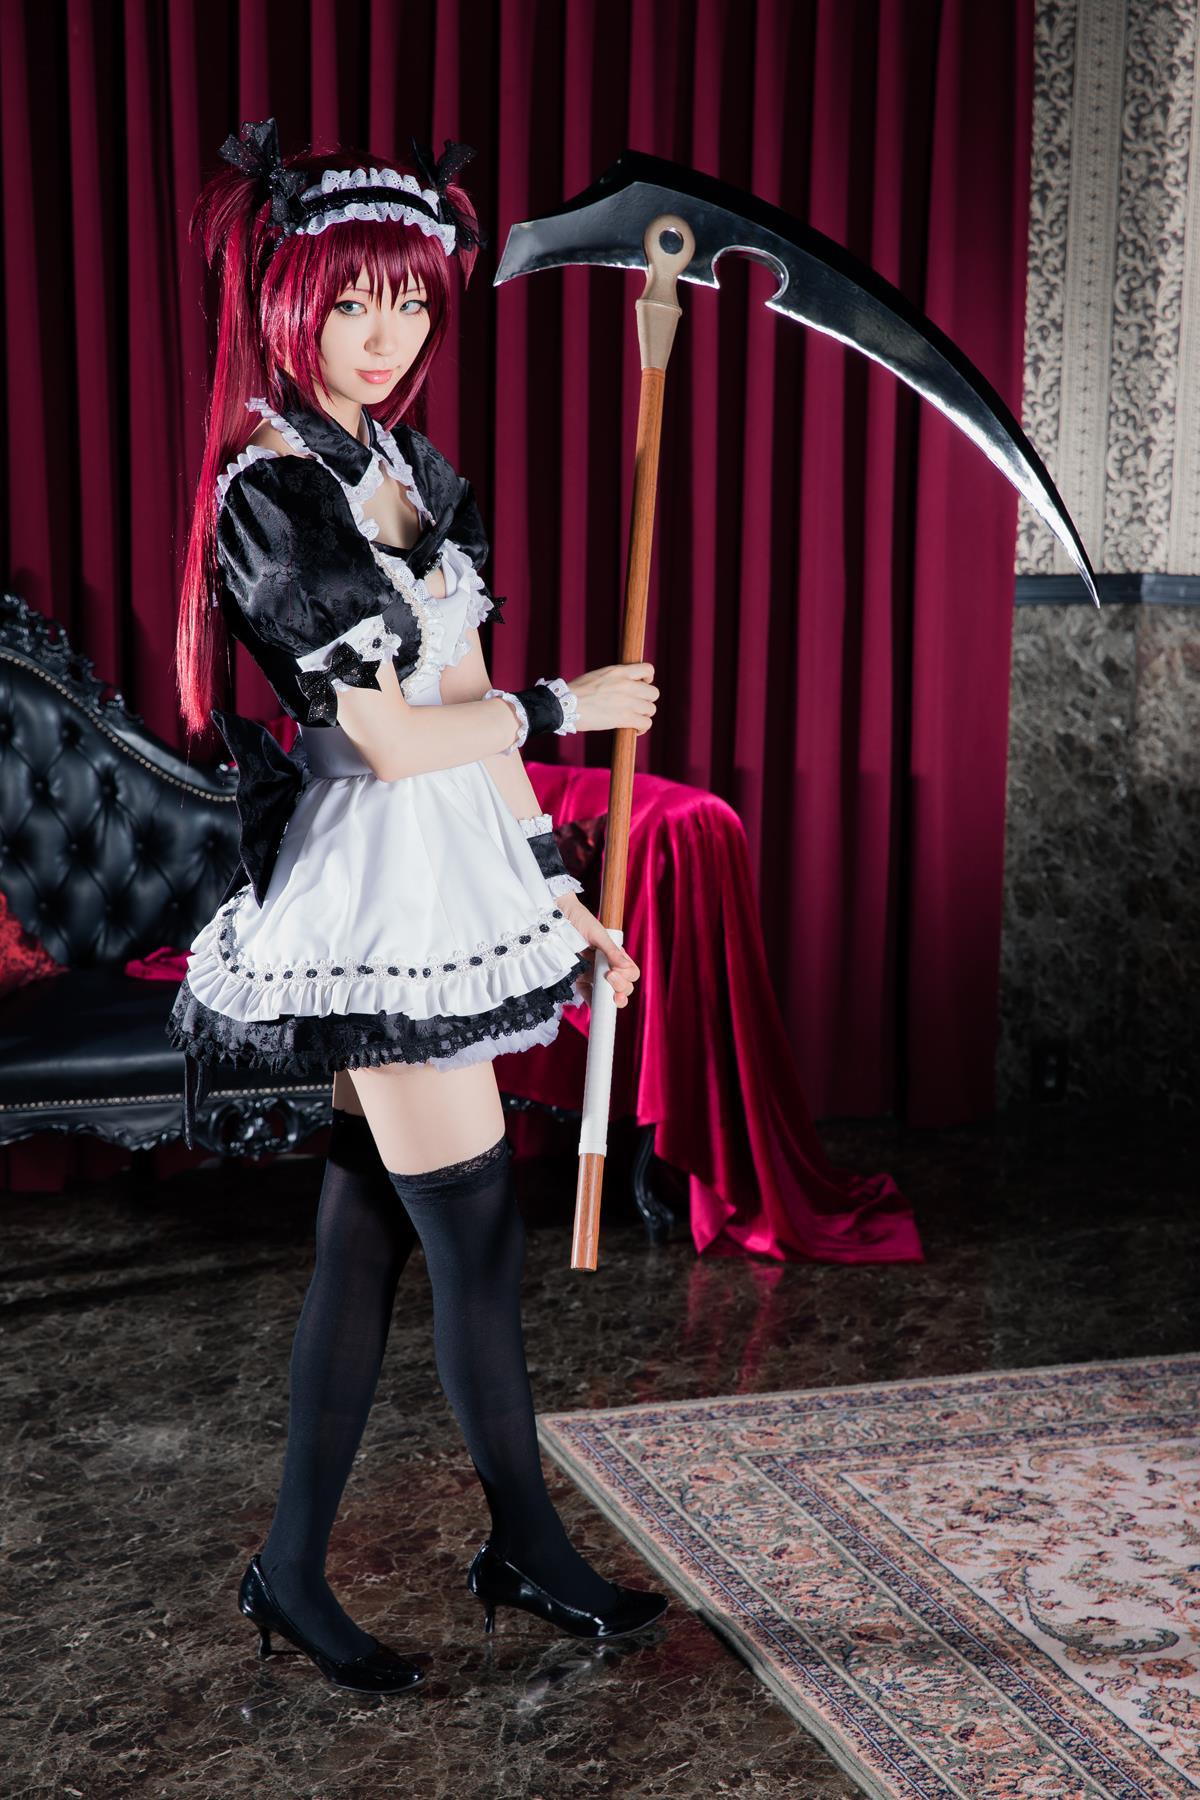 Mikehouse NO.026 Hakate HELL Queen s Blade - 27.jpg